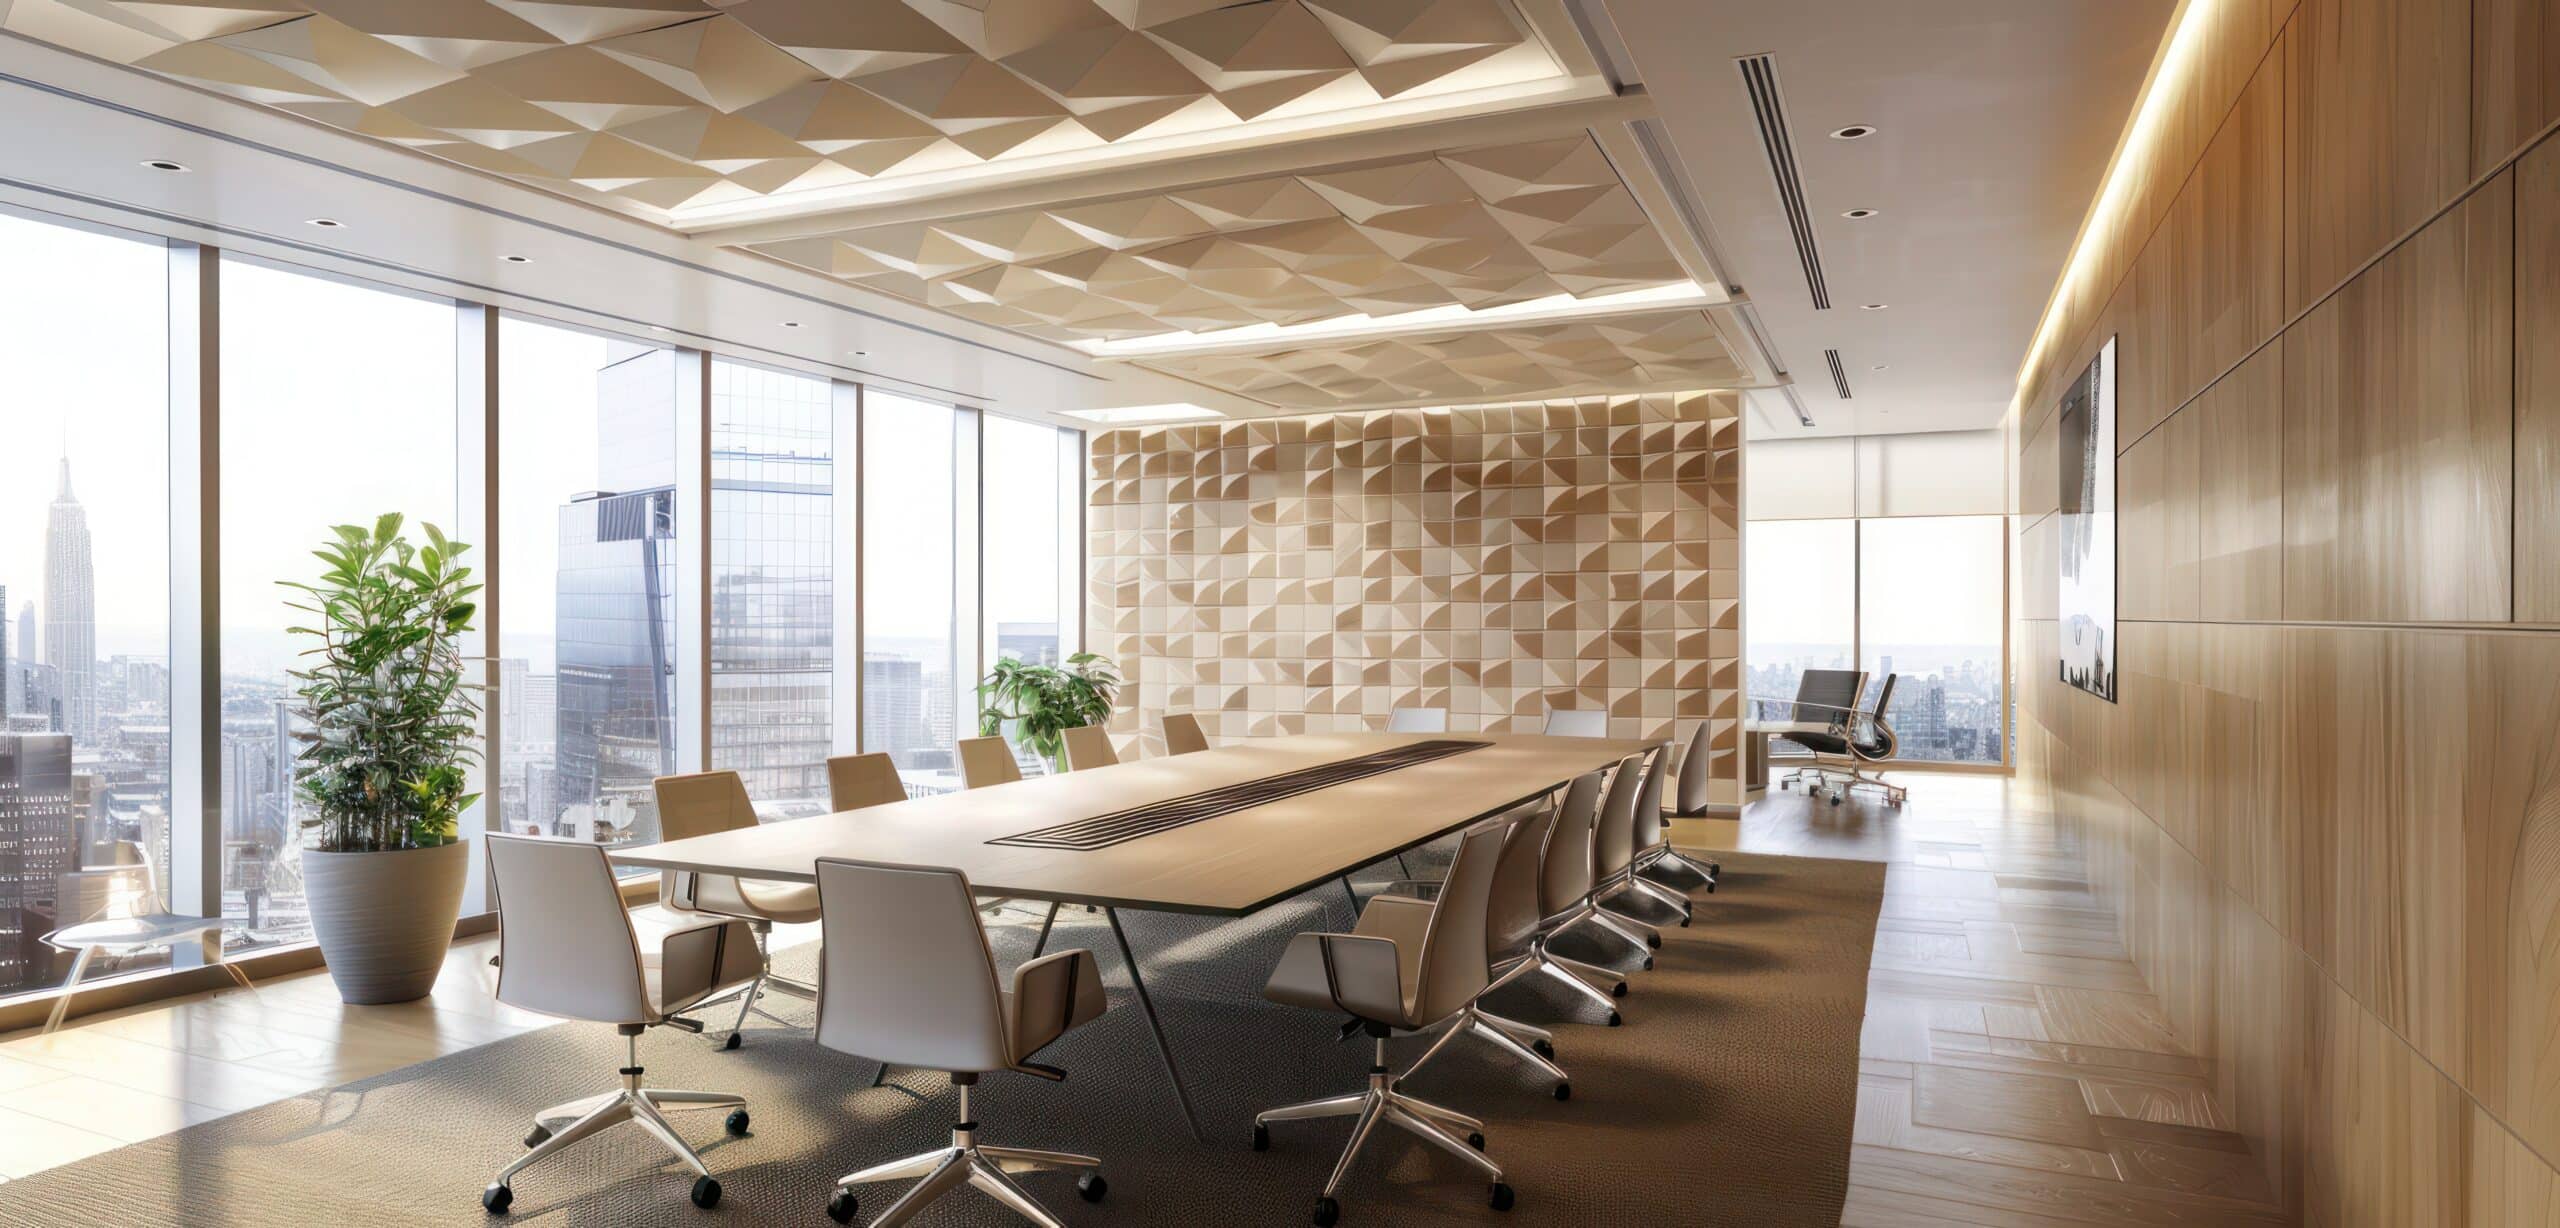 High-performance office with acoustic wall solutions and minimalist styling tailored for a quiet effective workspace